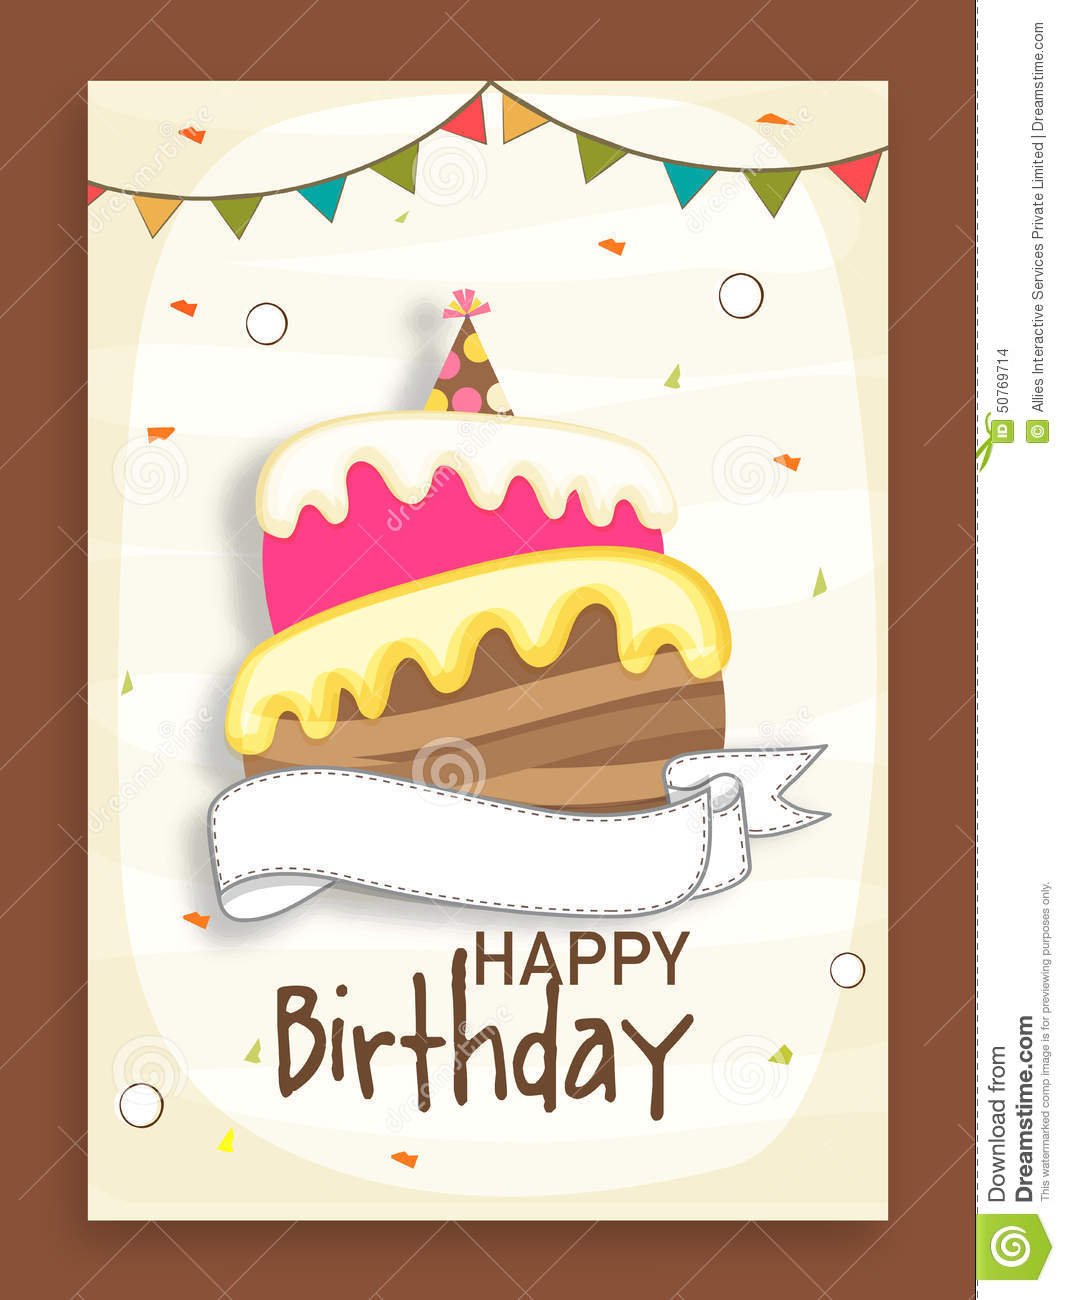 Invitation Cards Designs For Birthday Party Pictures About